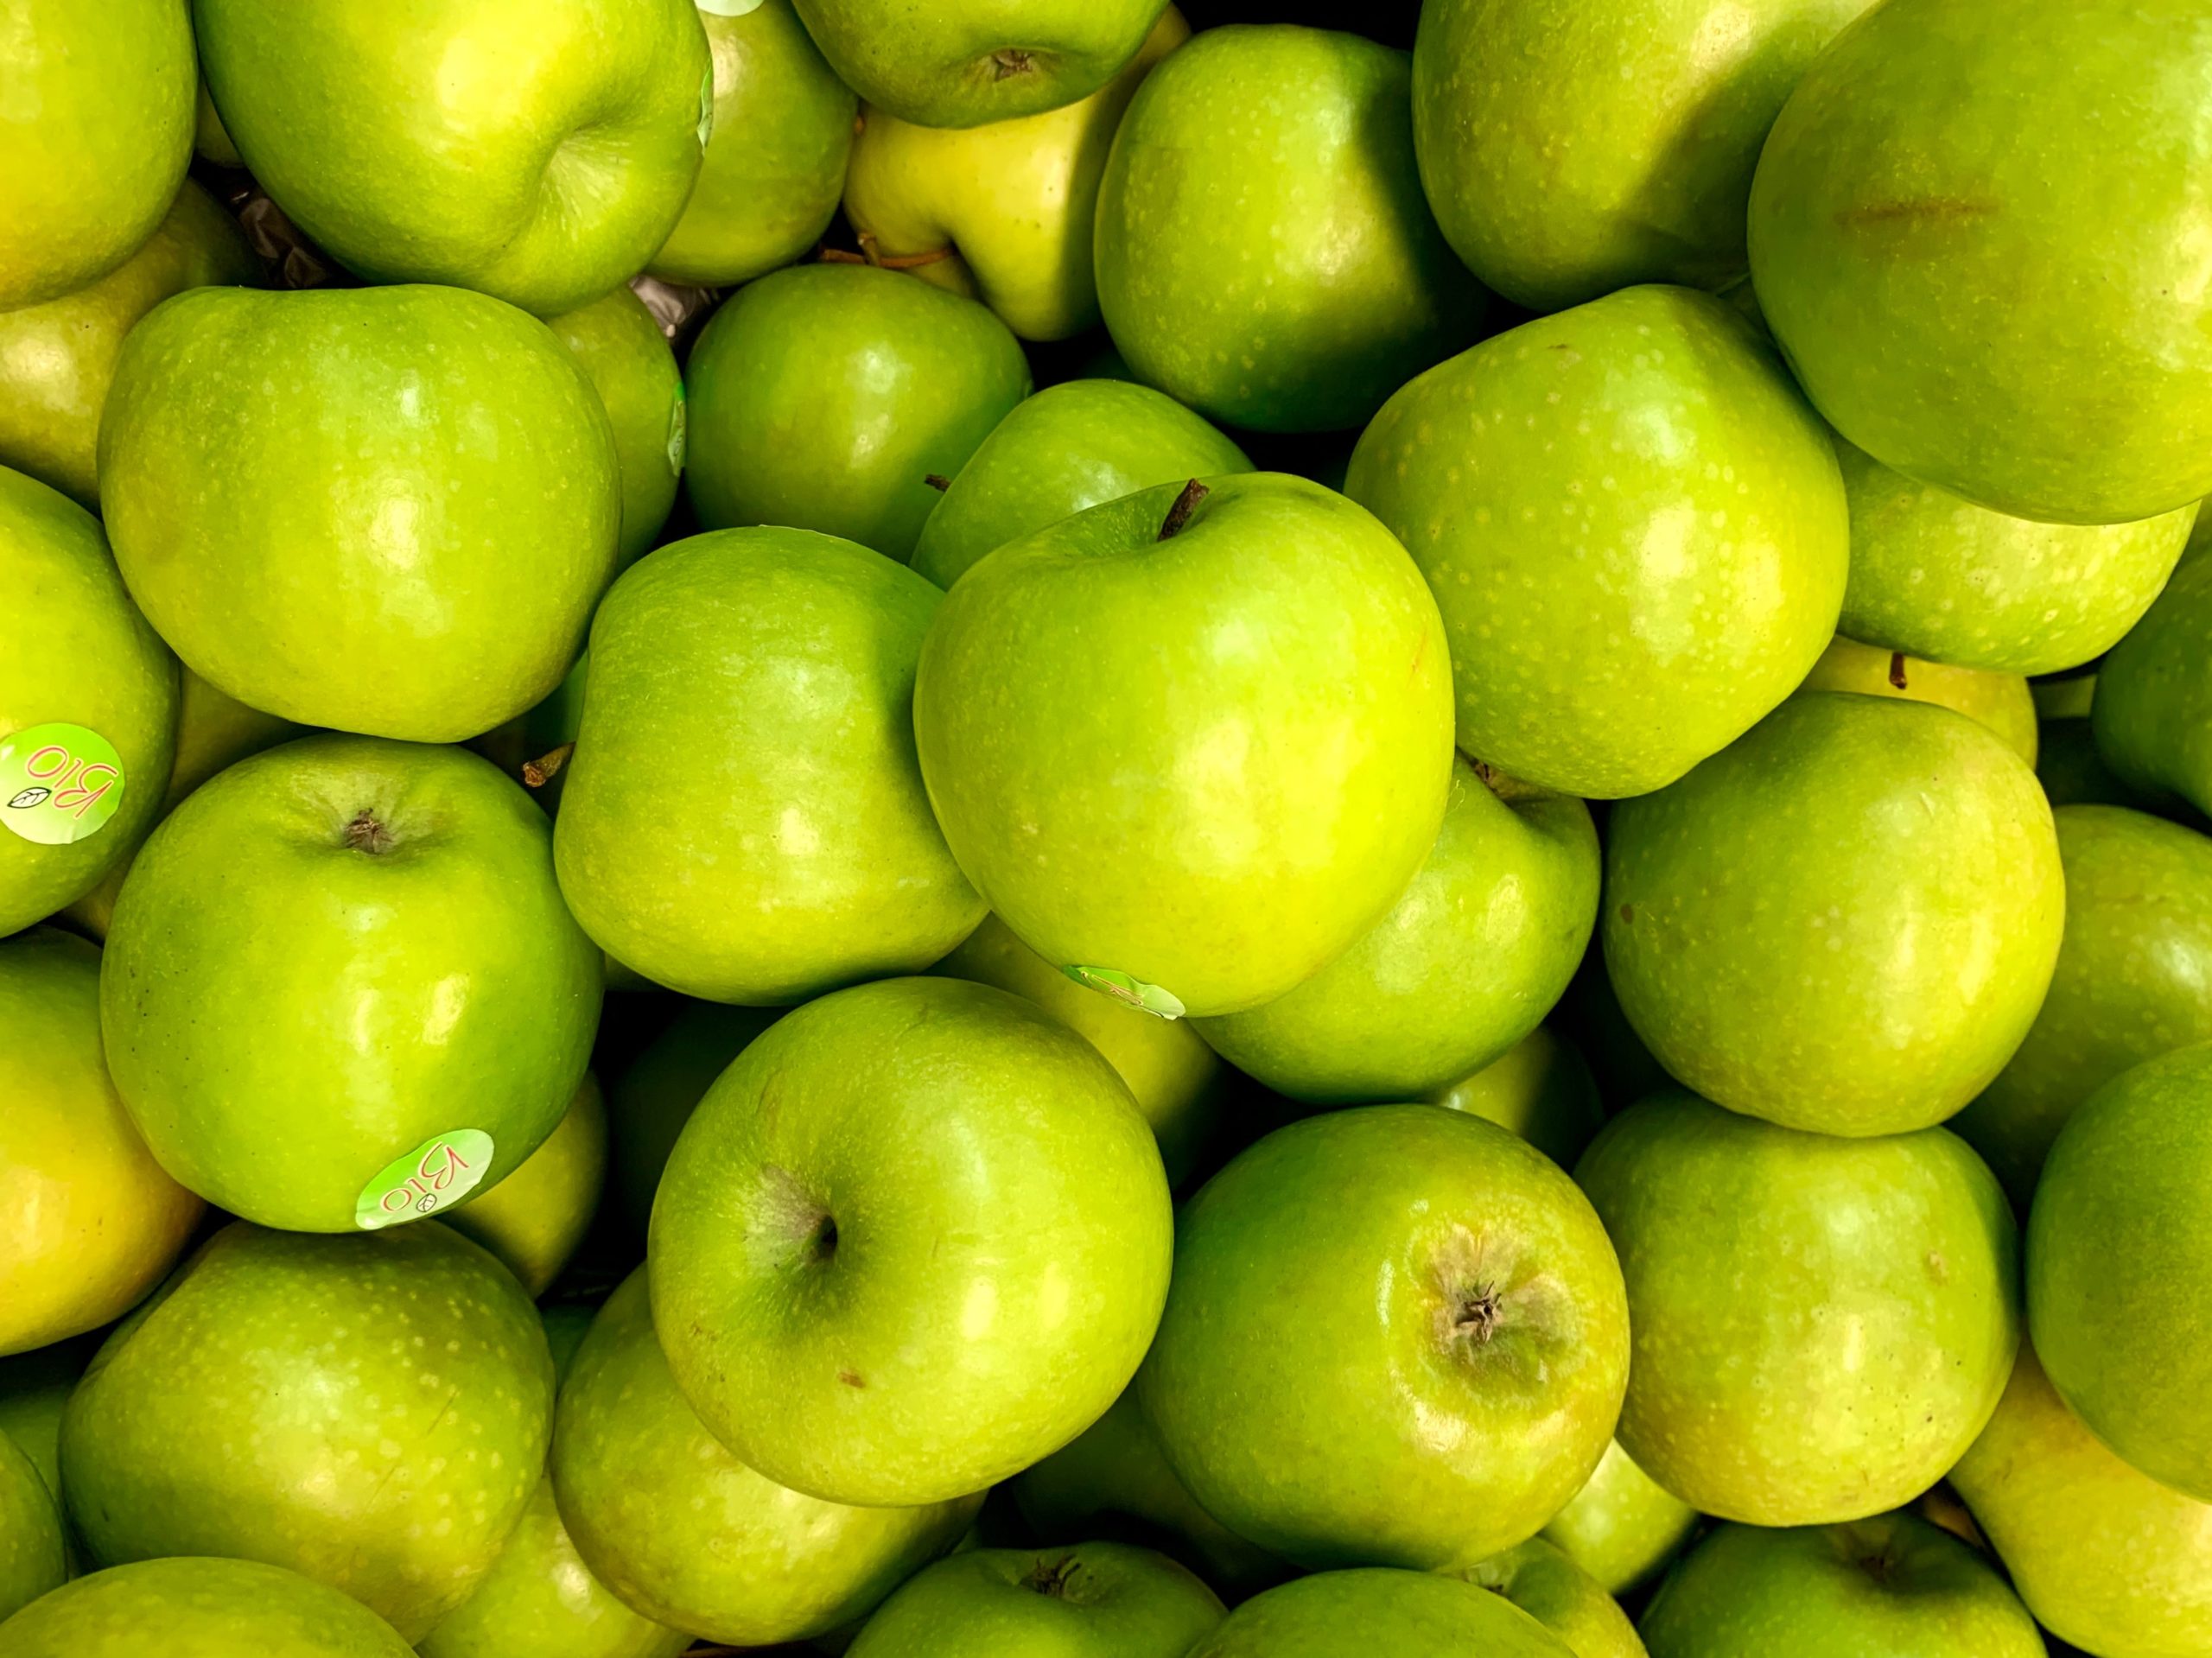 pile of green apples